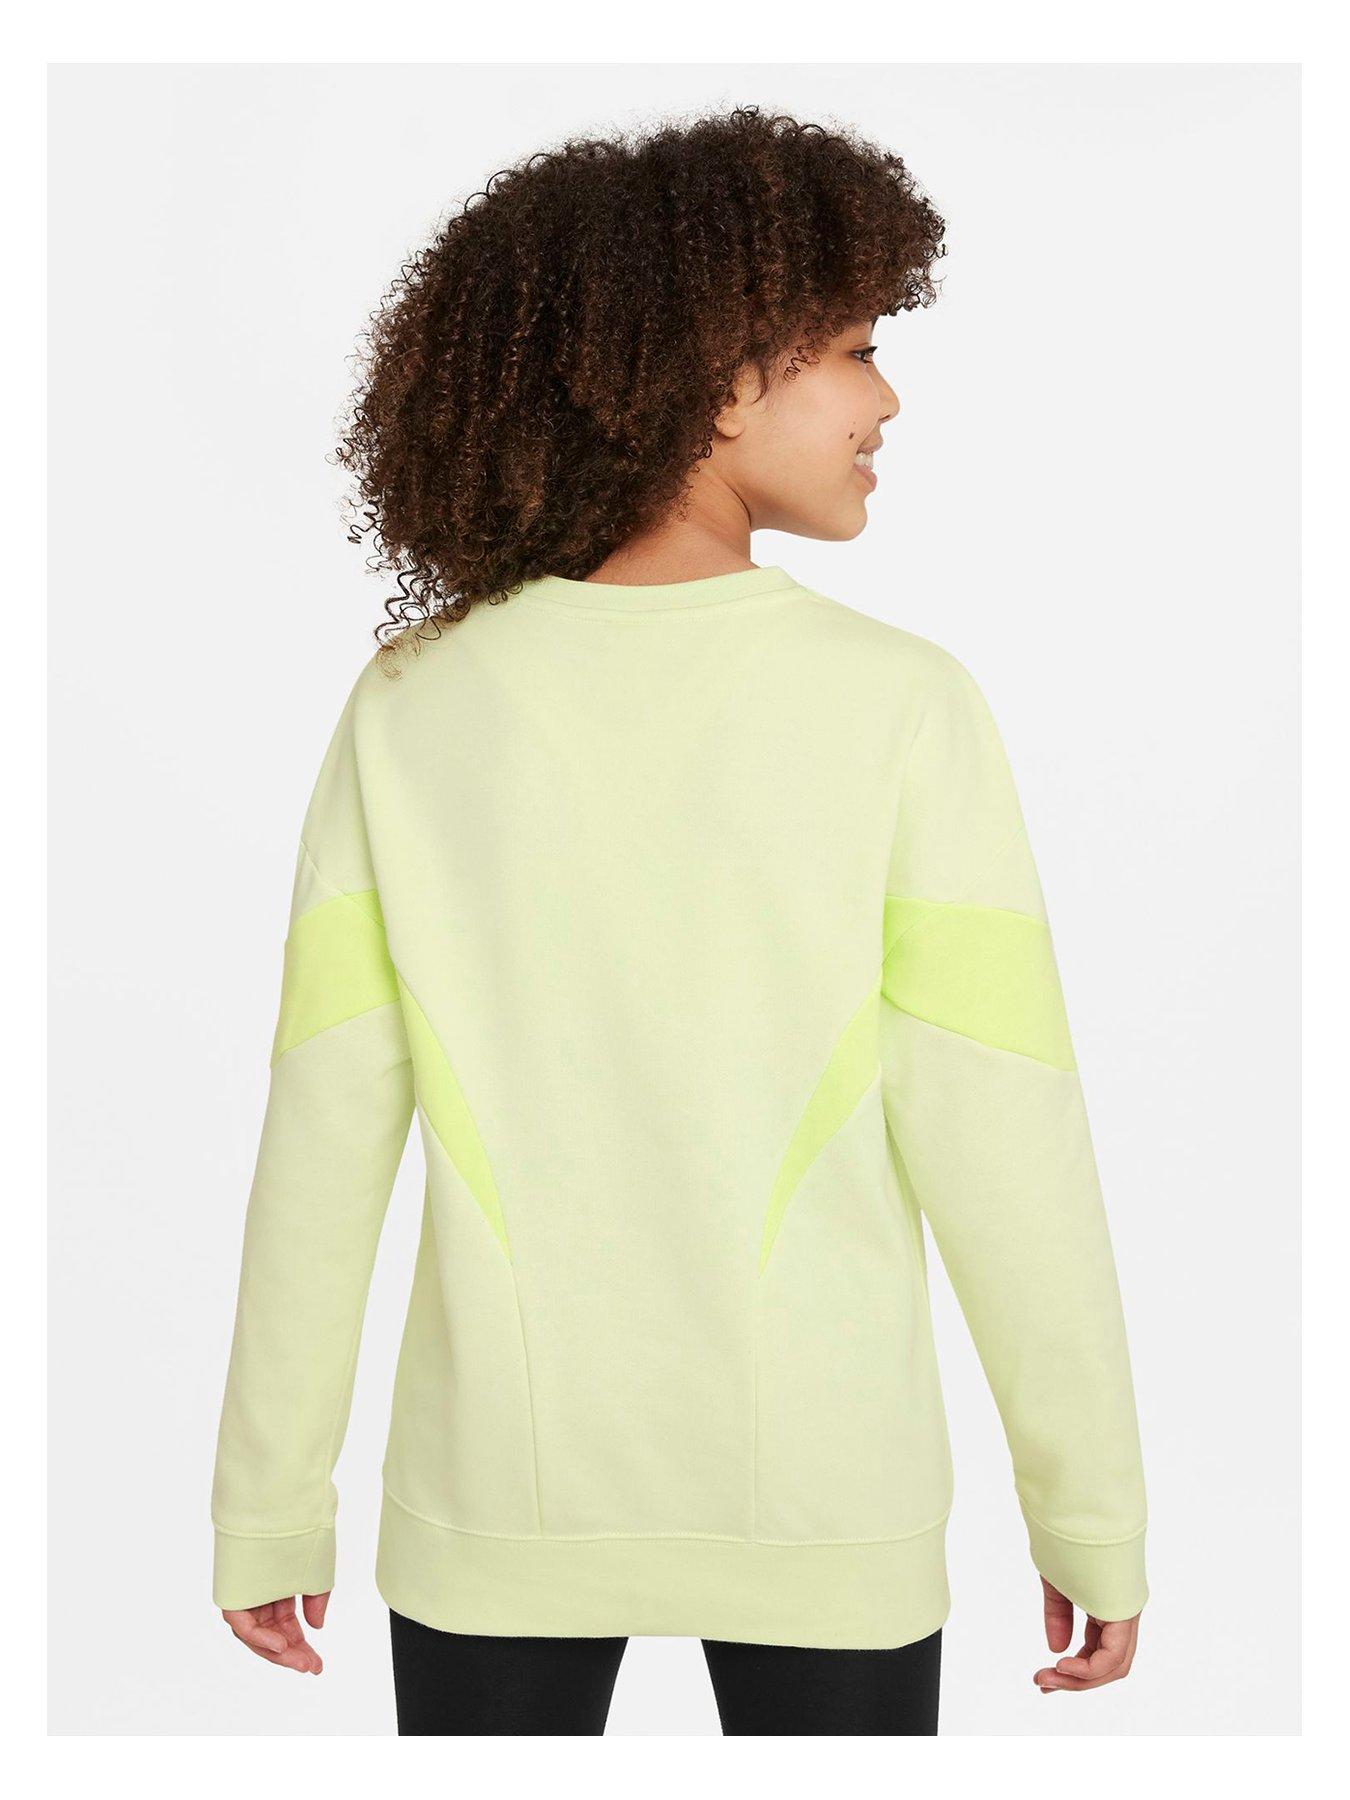 Kids NSW Girls Air French Terry Crew Sweat Top - Green